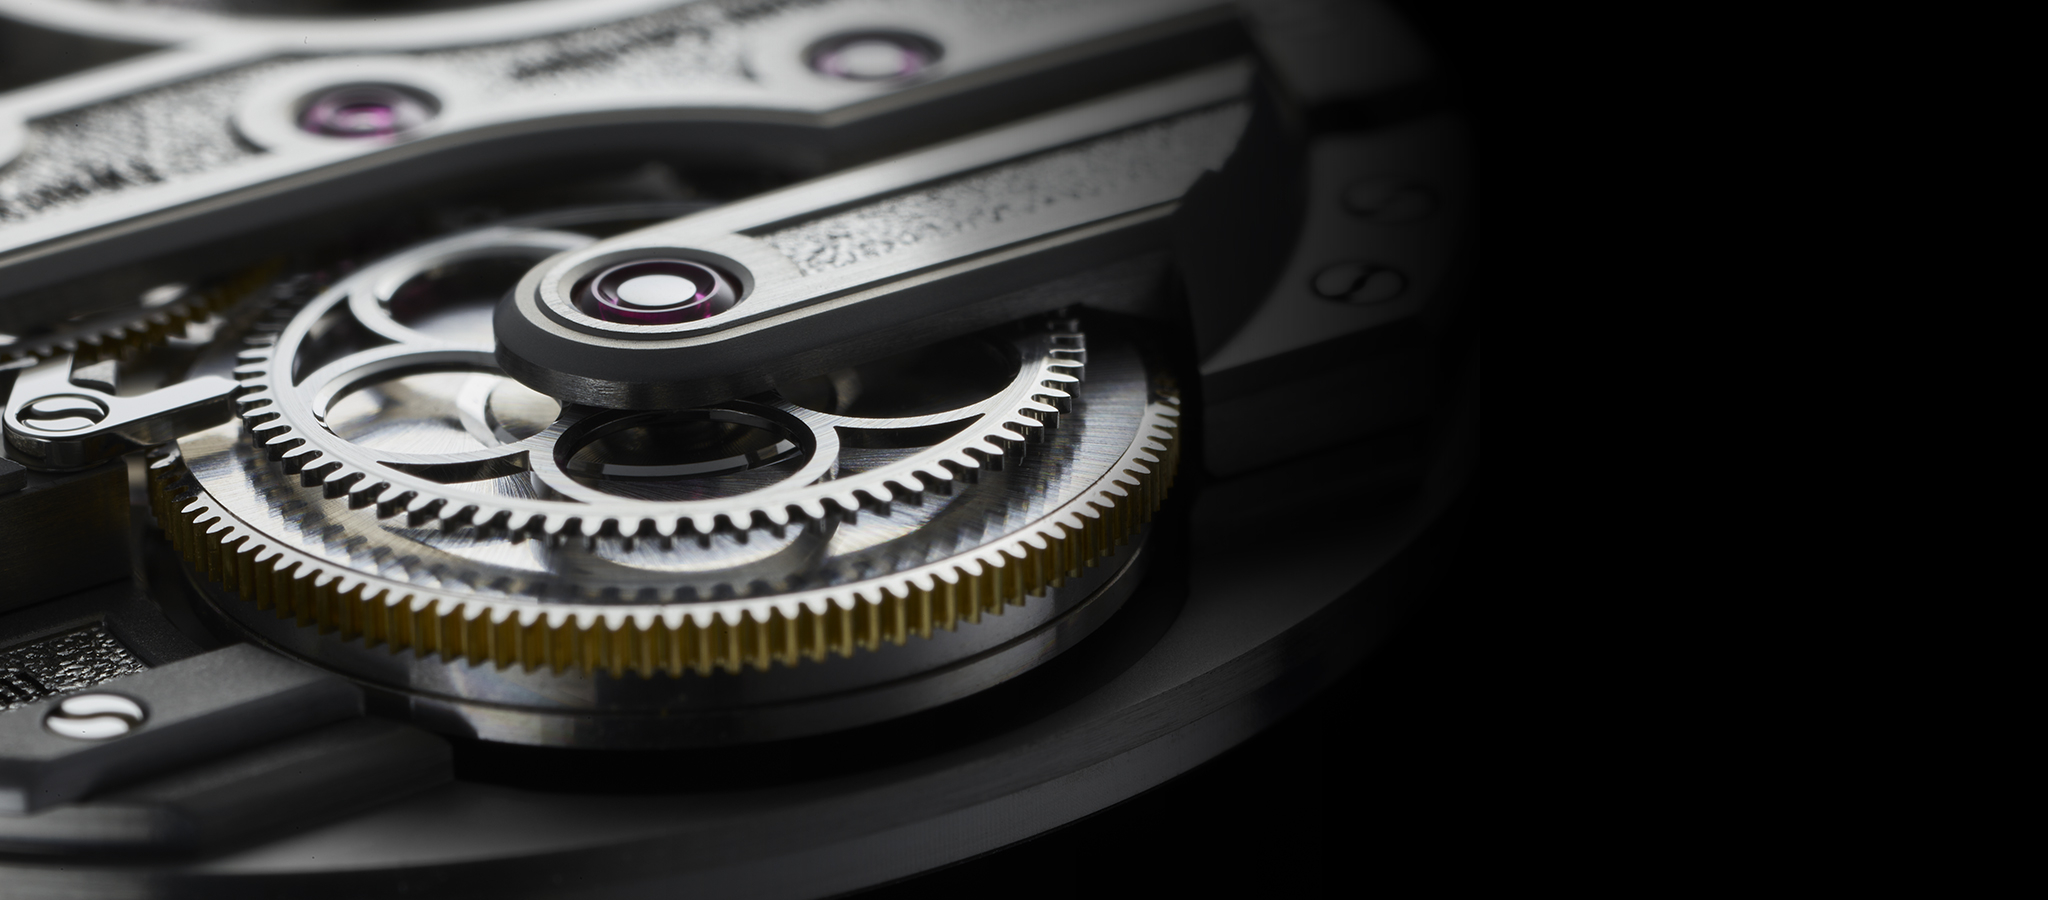 Romain Gauthier, Gears and ratchet wheels with circular, bevelled spokes